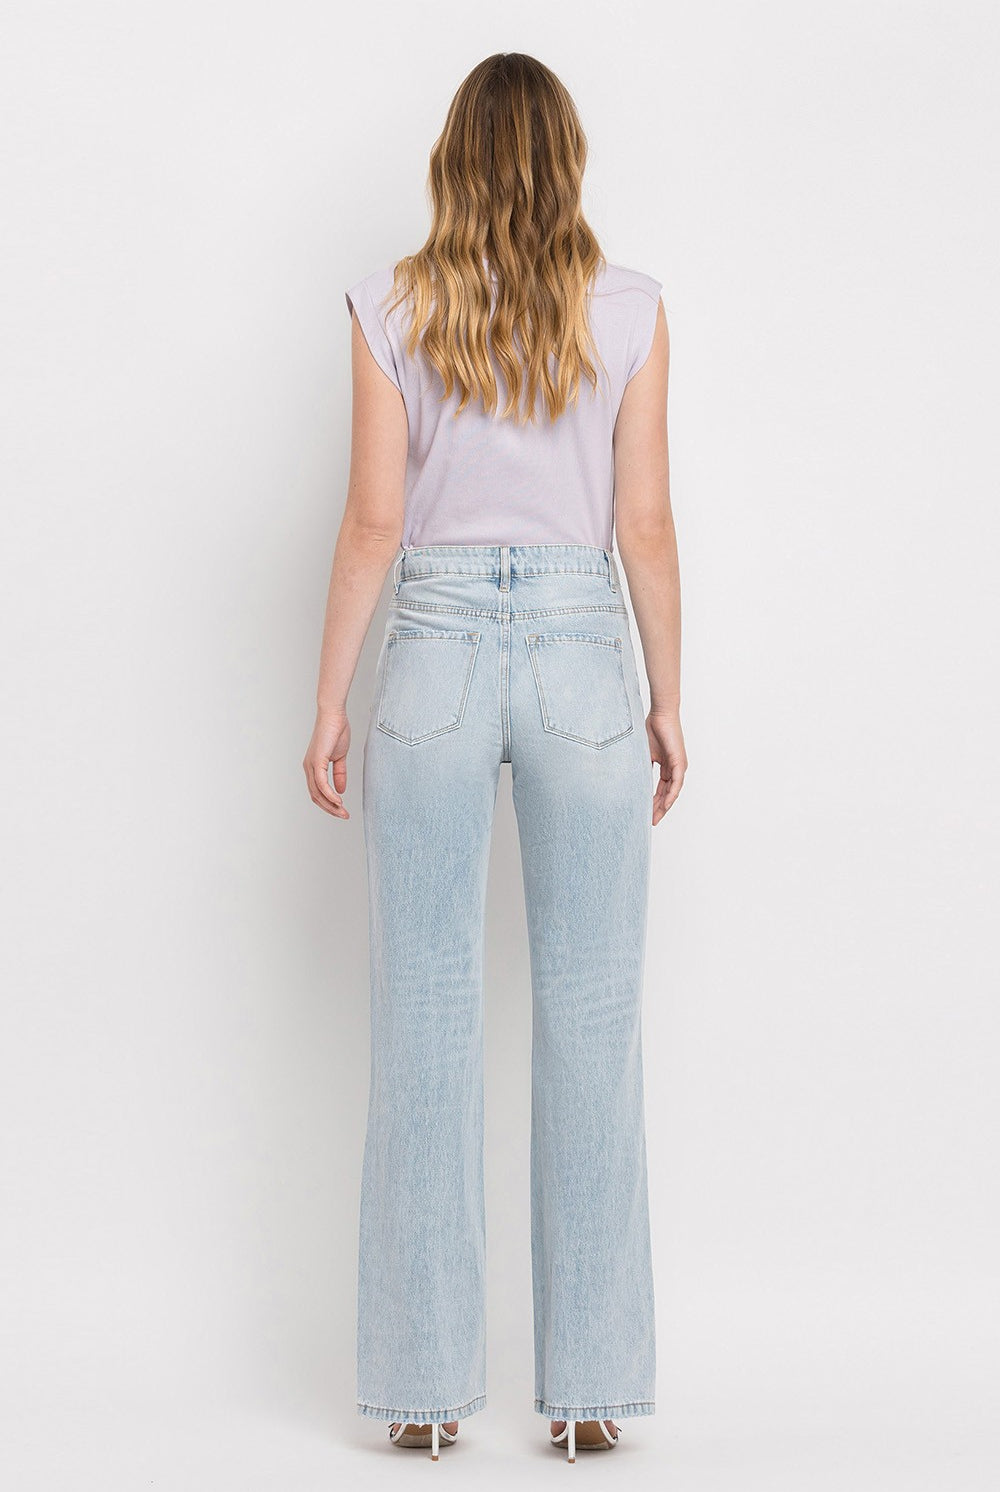 Flying Monkey high rise flare jeans with a vintage 90s look.